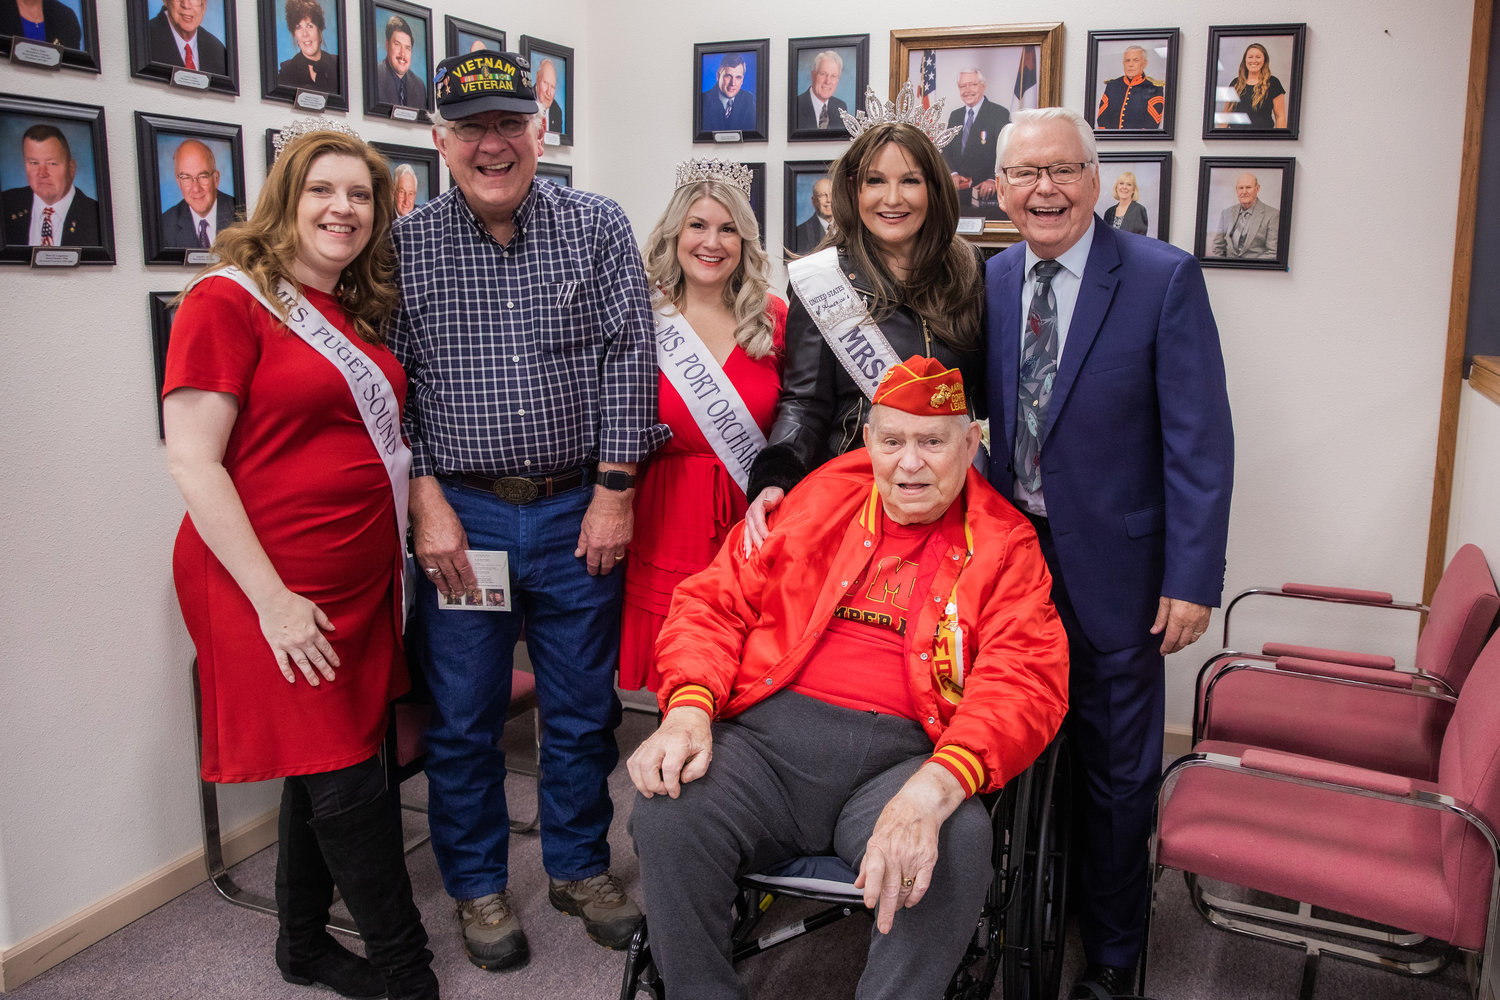 Bob Jordan and Jack Williams pose for a photo with Lee Grimes and Mrs. United States of America crowns on Veterans Day during the 25th anniversary of the Veterans Memorial Museum in Chehalis.